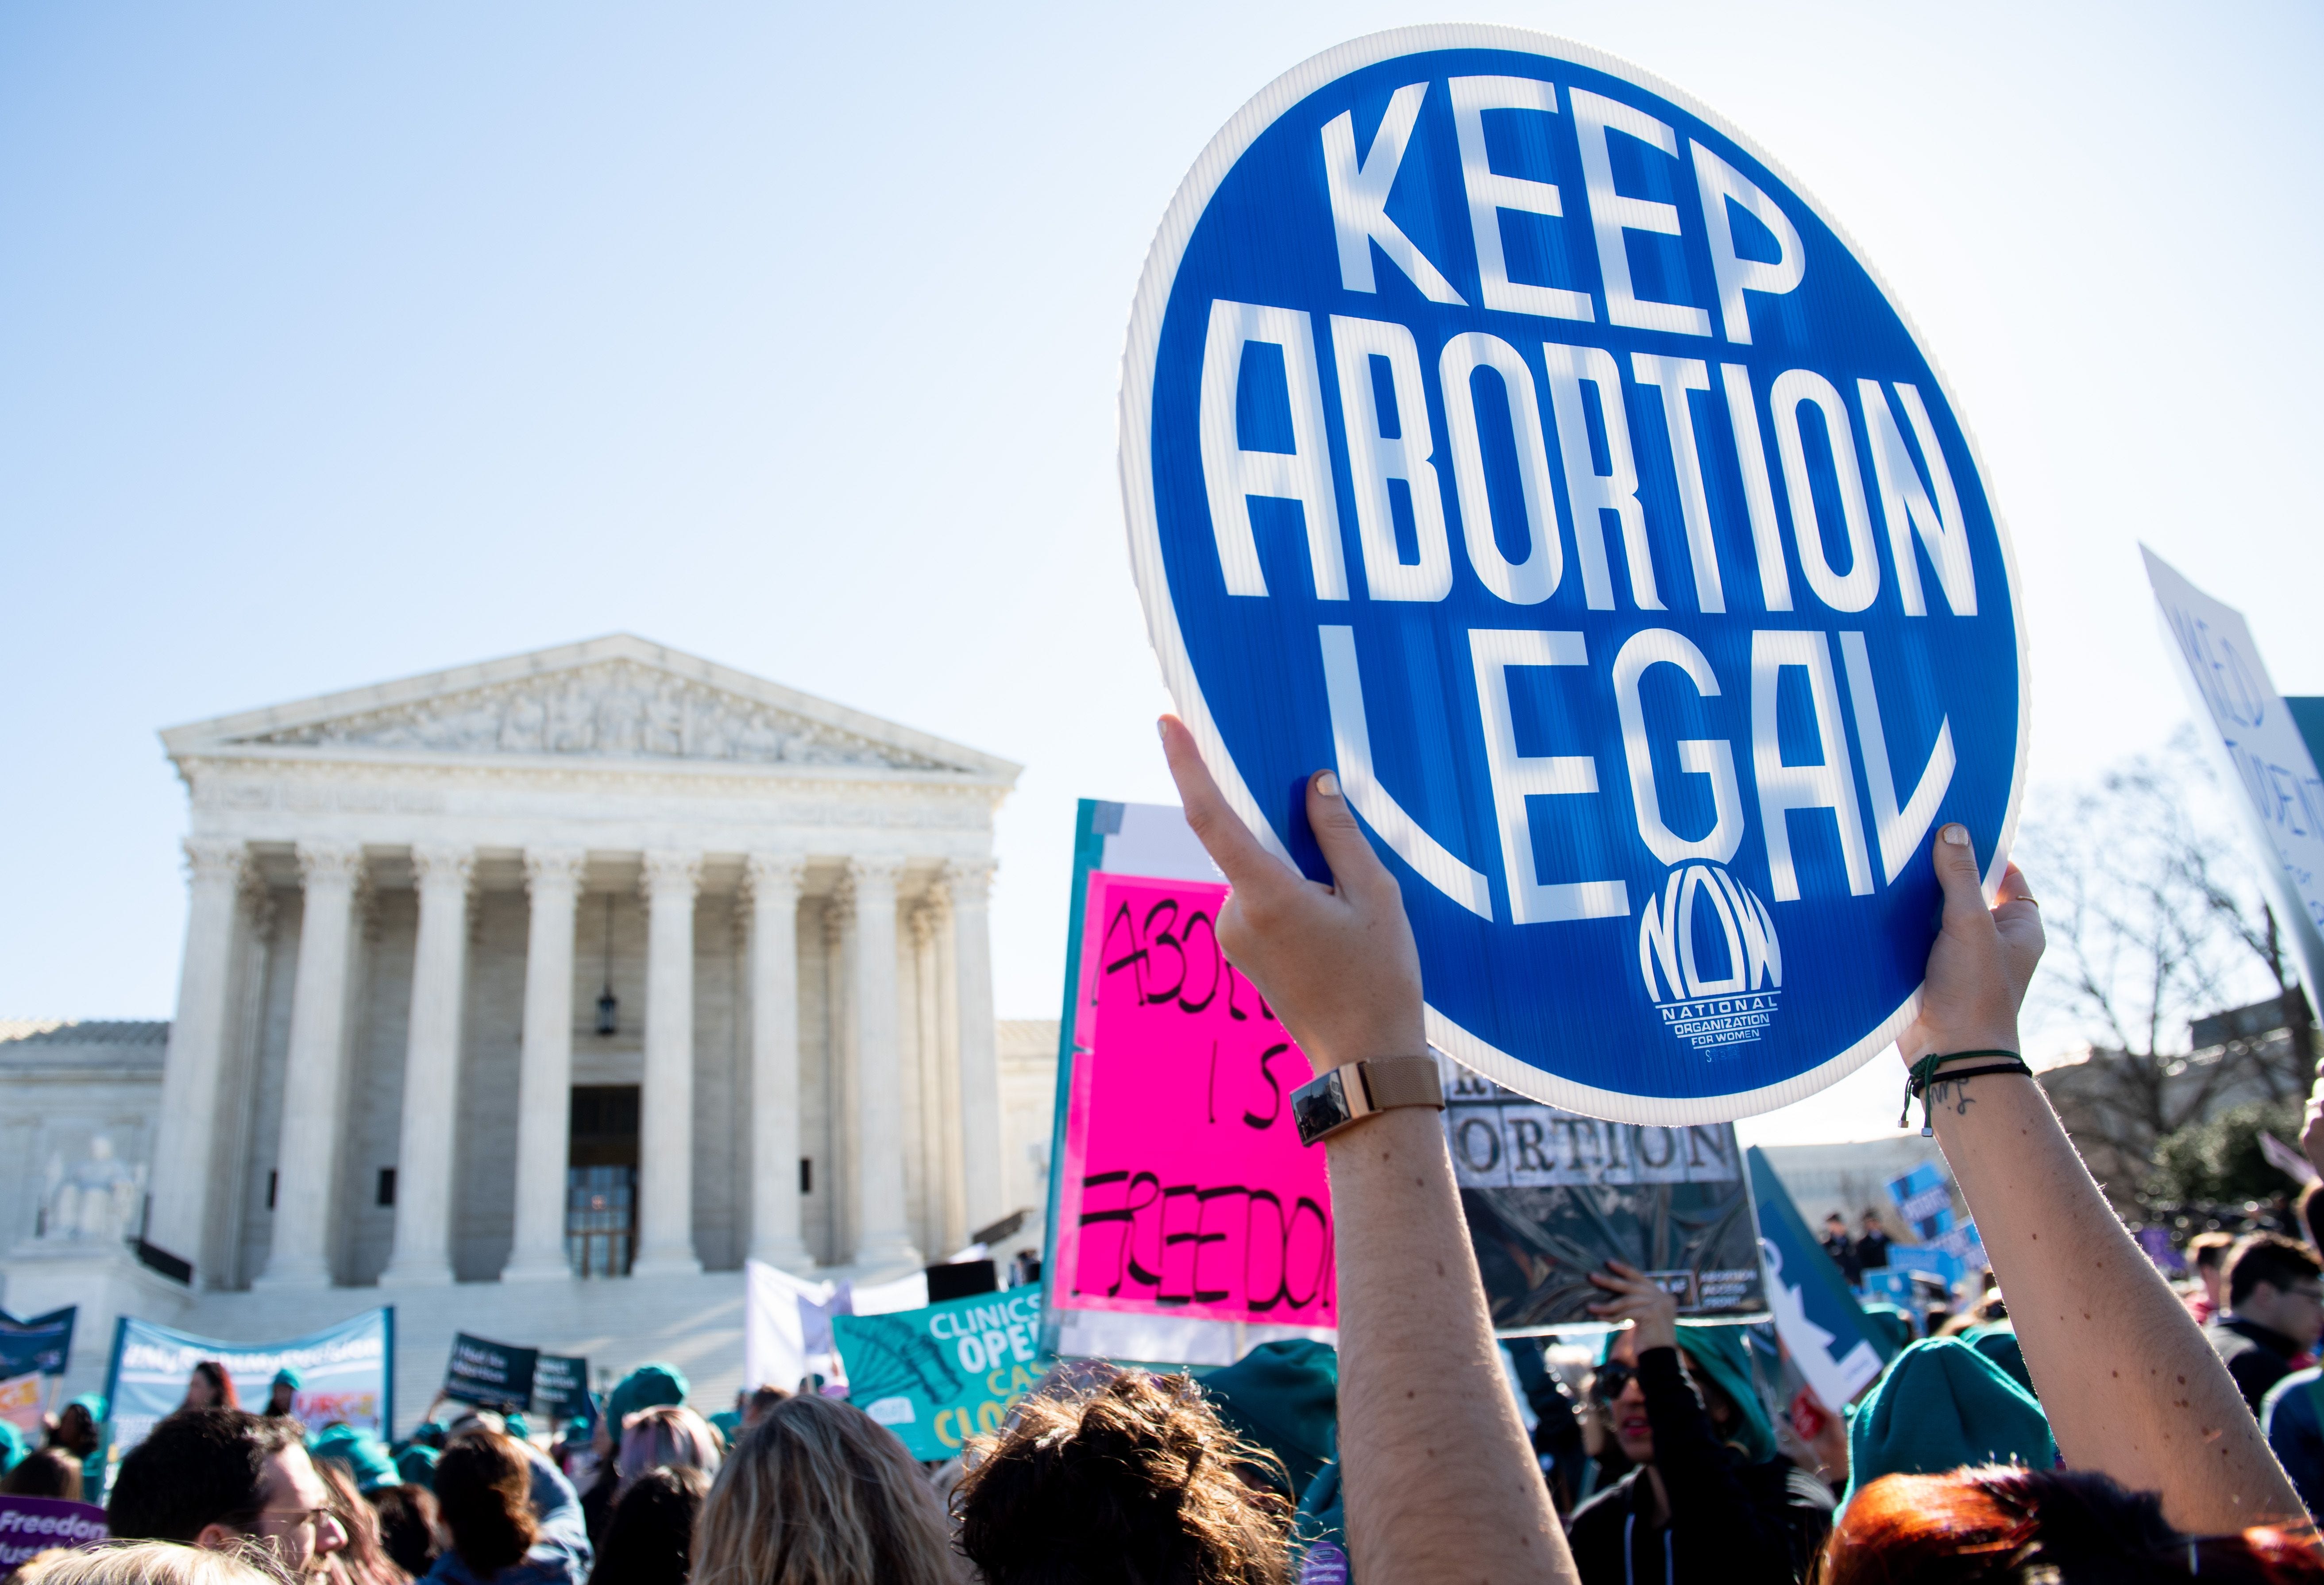 Activists supporting legal access to abortion protest outside the Supreme Court on March 4, 2020, as justices hear oral arguments regarding a Louisiana law in the court's first major abortion case in years.